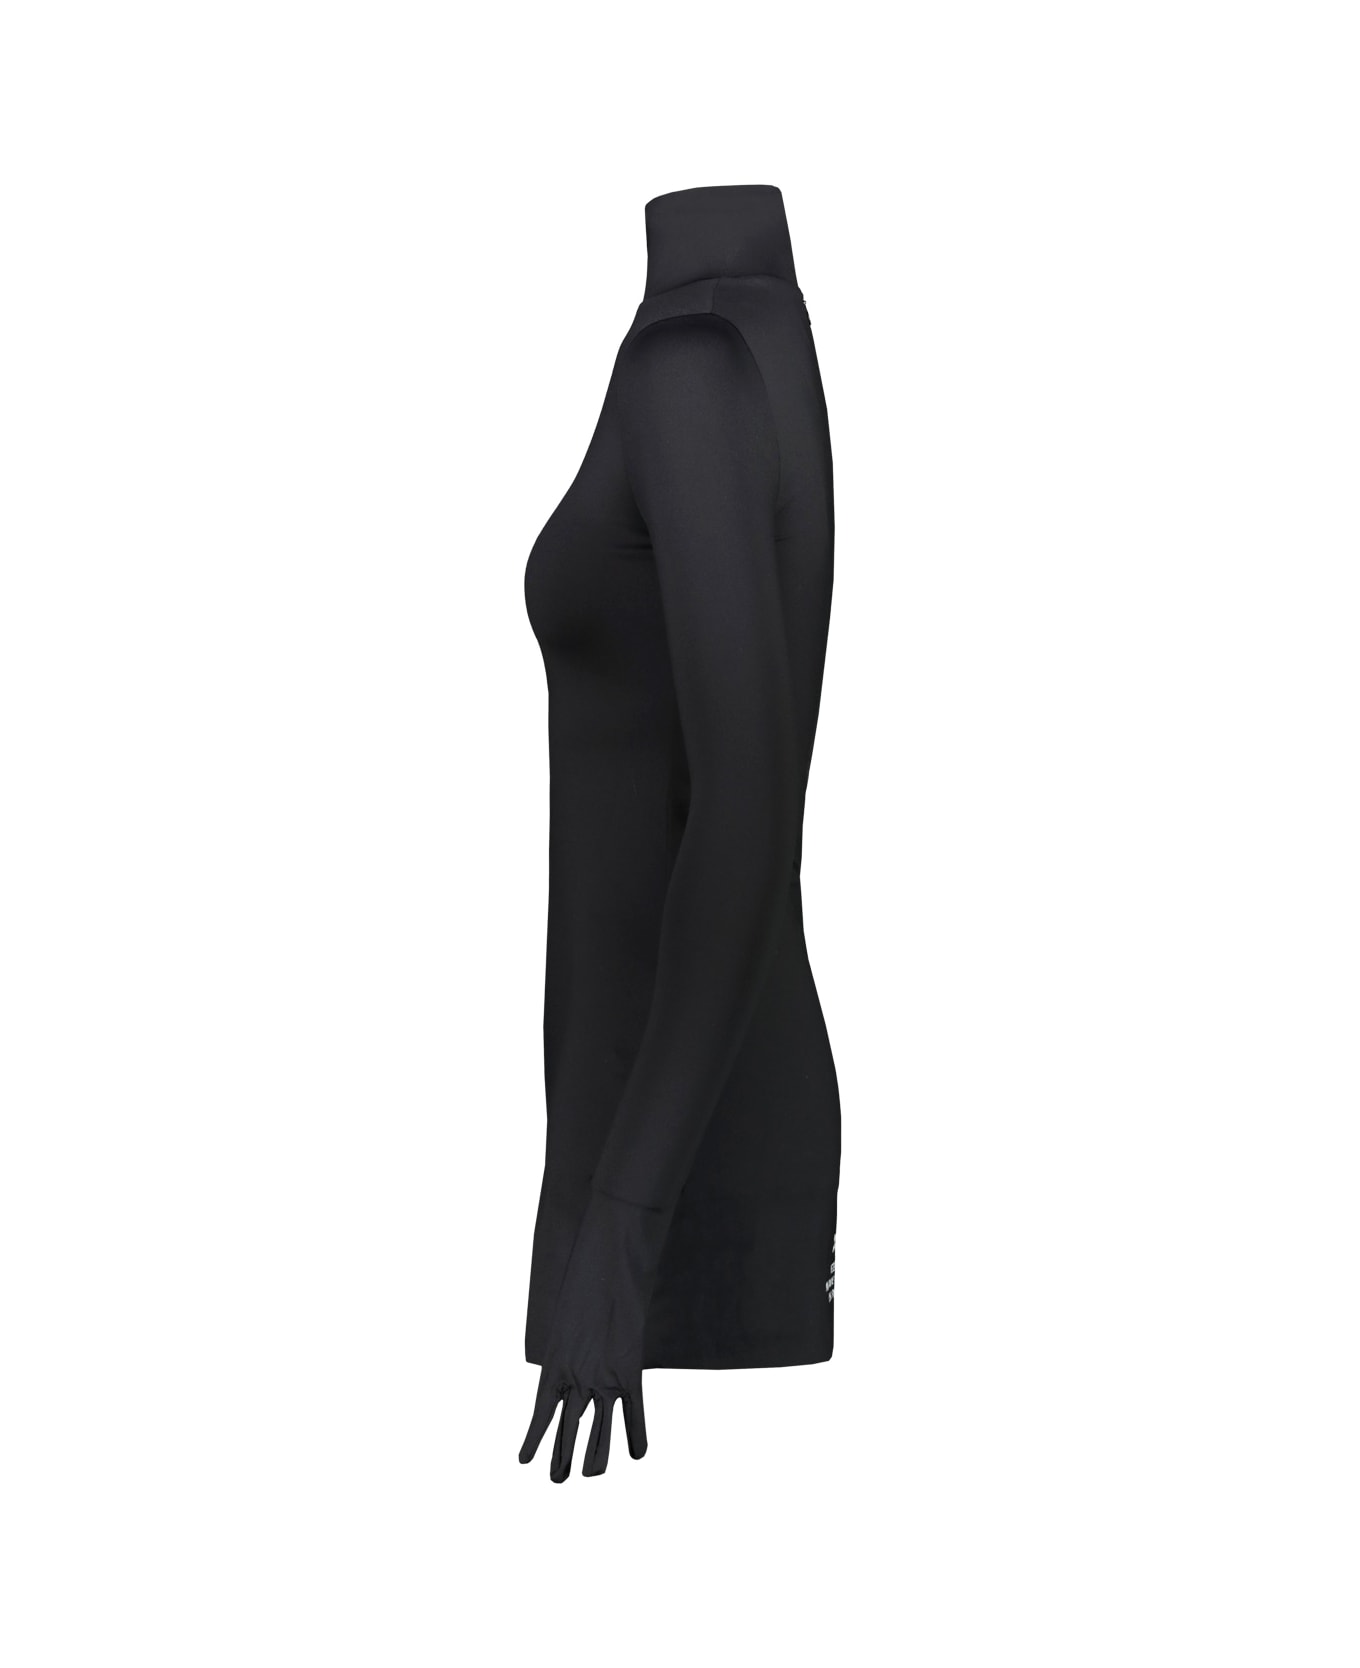 VETEMENTS Maison De Couture Styling Dress With Gloves - Black トップス